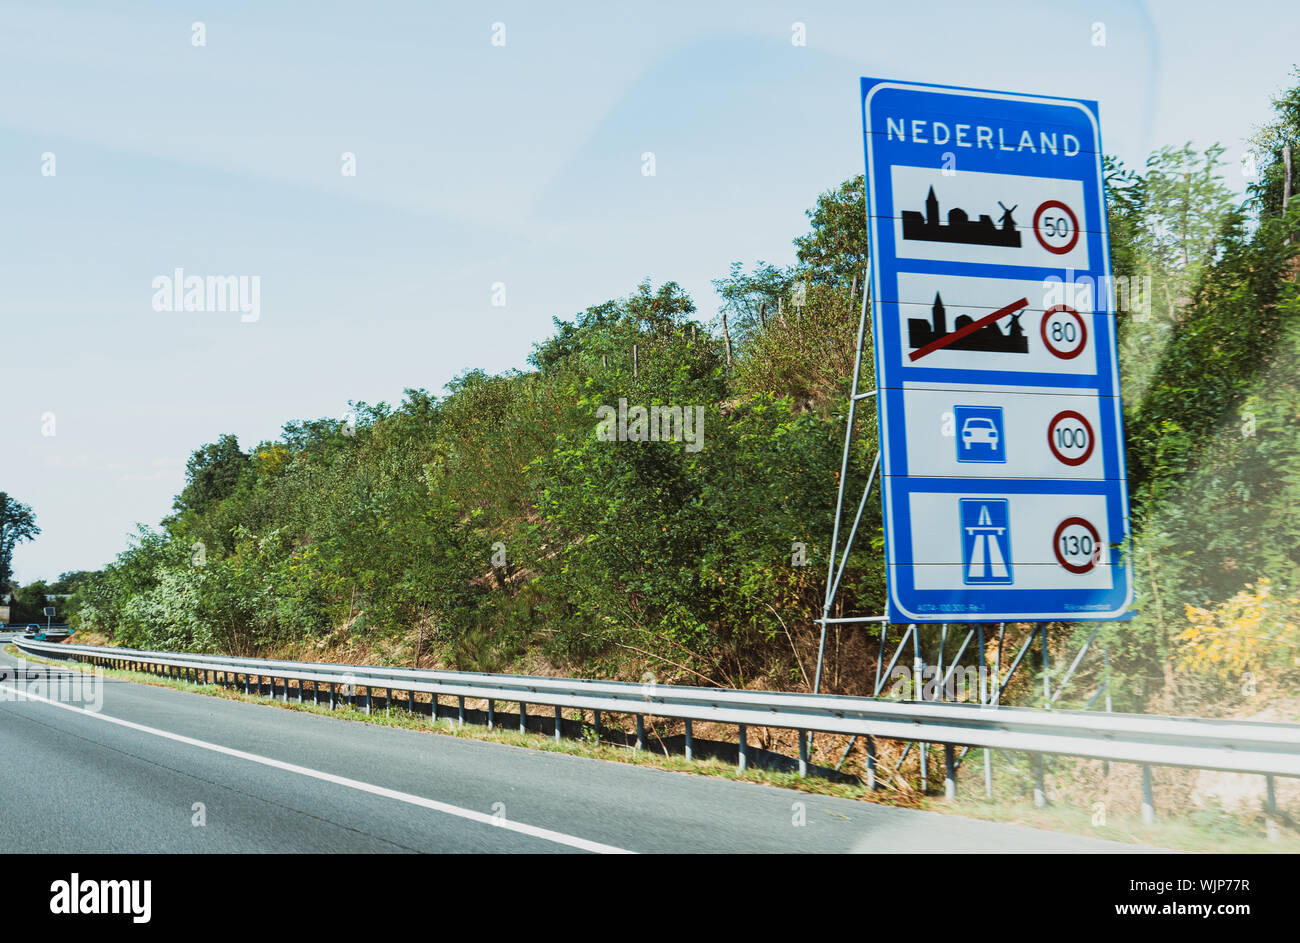 Nederland text at the border between Germany and Netherlands with speed limits in city, highway and rural roads Stock Photo